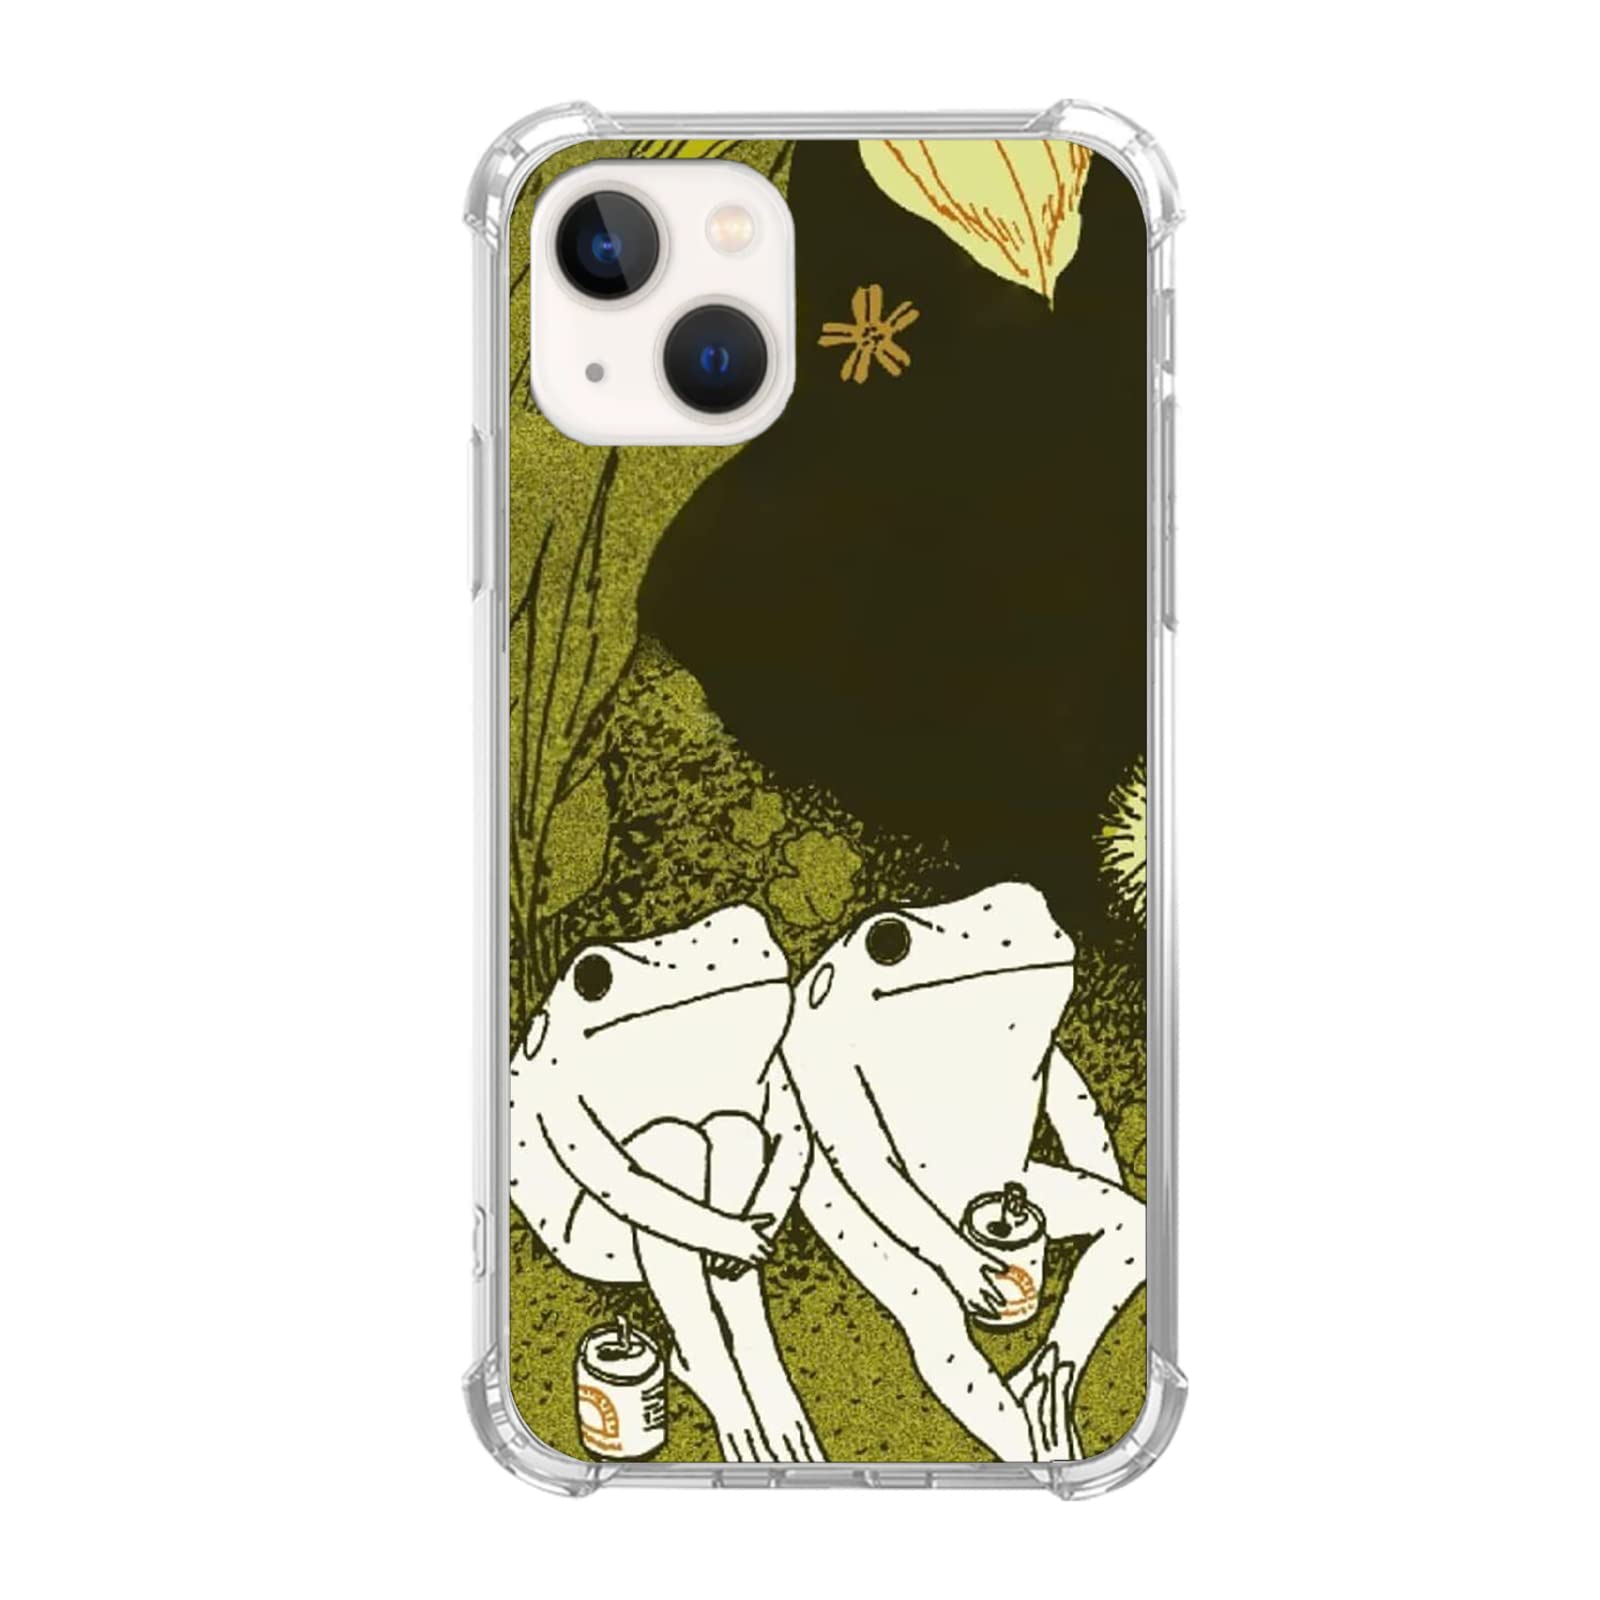 Nsyosio Reto Frogs Case For Iphone 13,Aesthetic Drinking Frogs Case For Men Women,Unique Cool Tpu Bumper Case Compatible With Ip